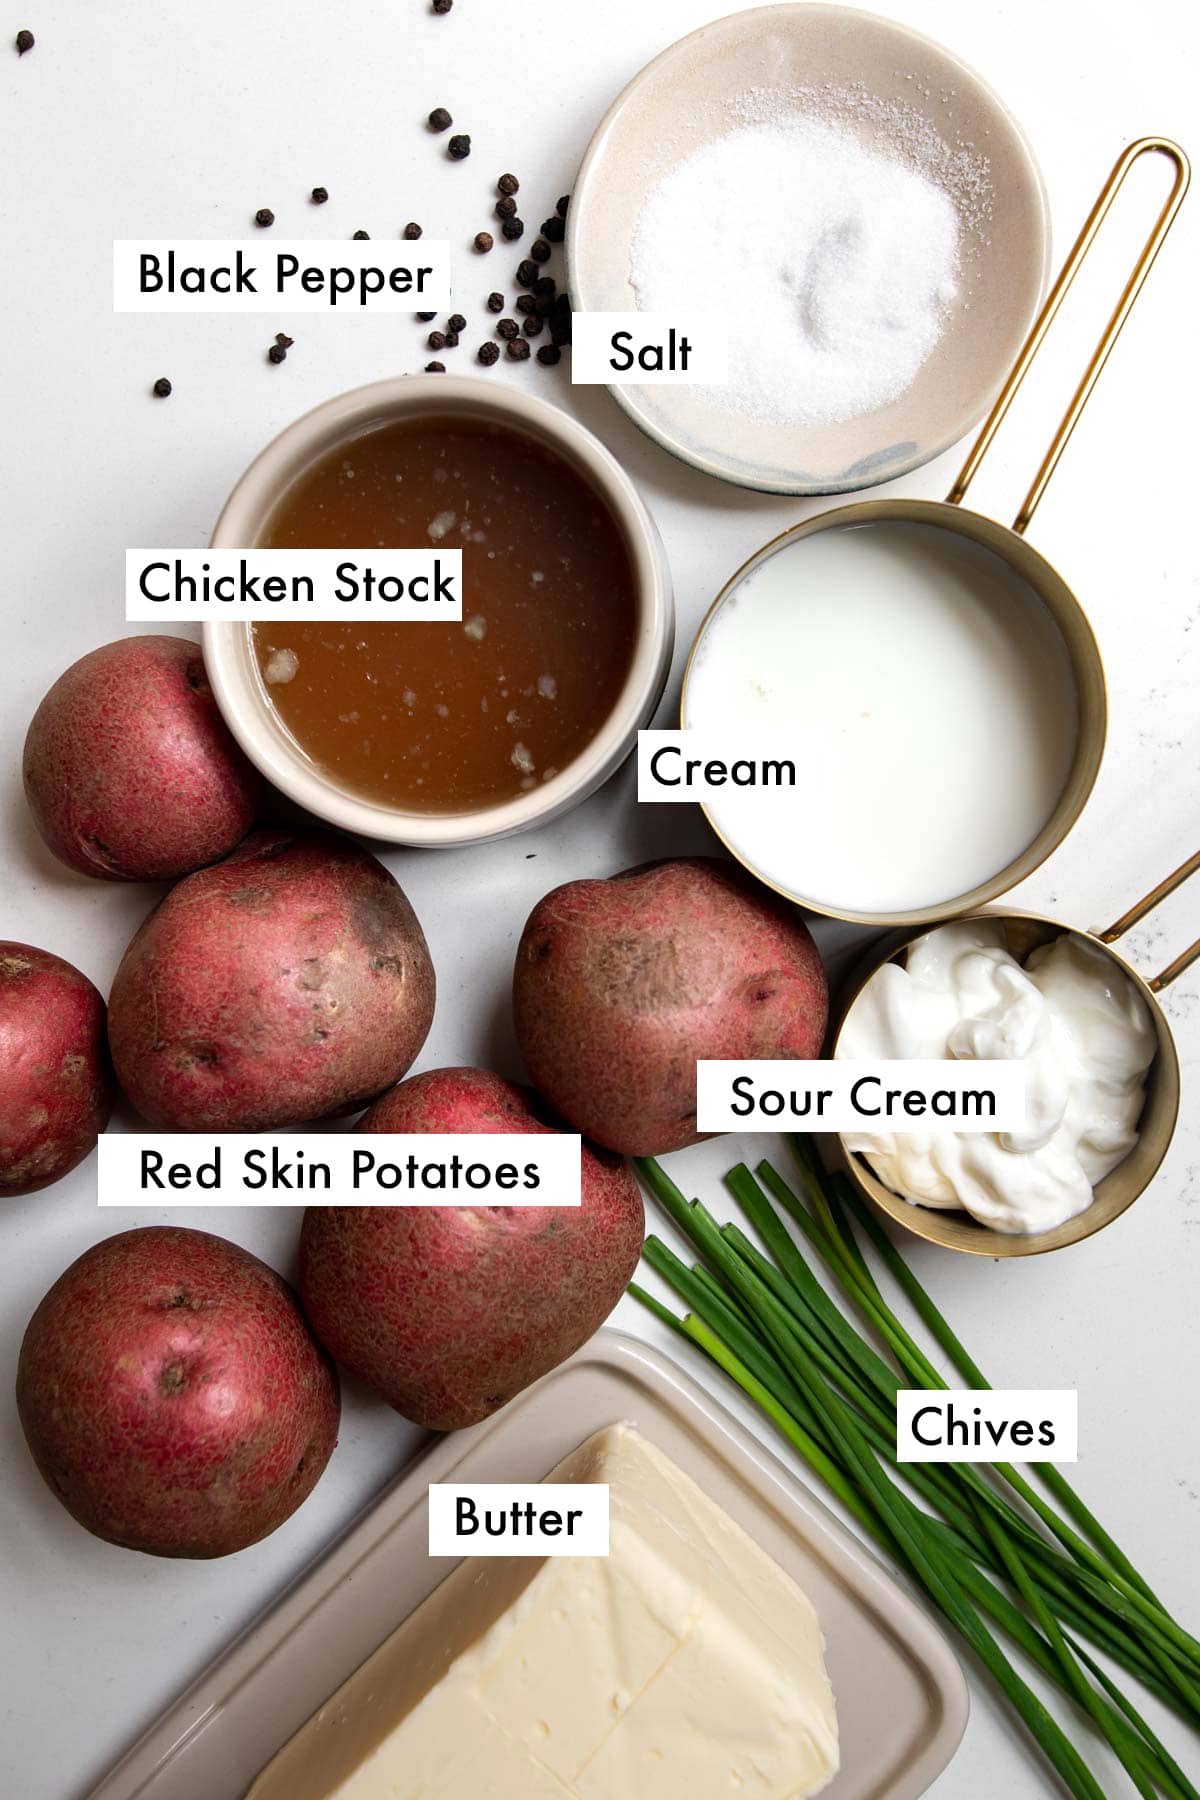 ingredients needed to make creamy ed skin mashed potatoes with text graphics.